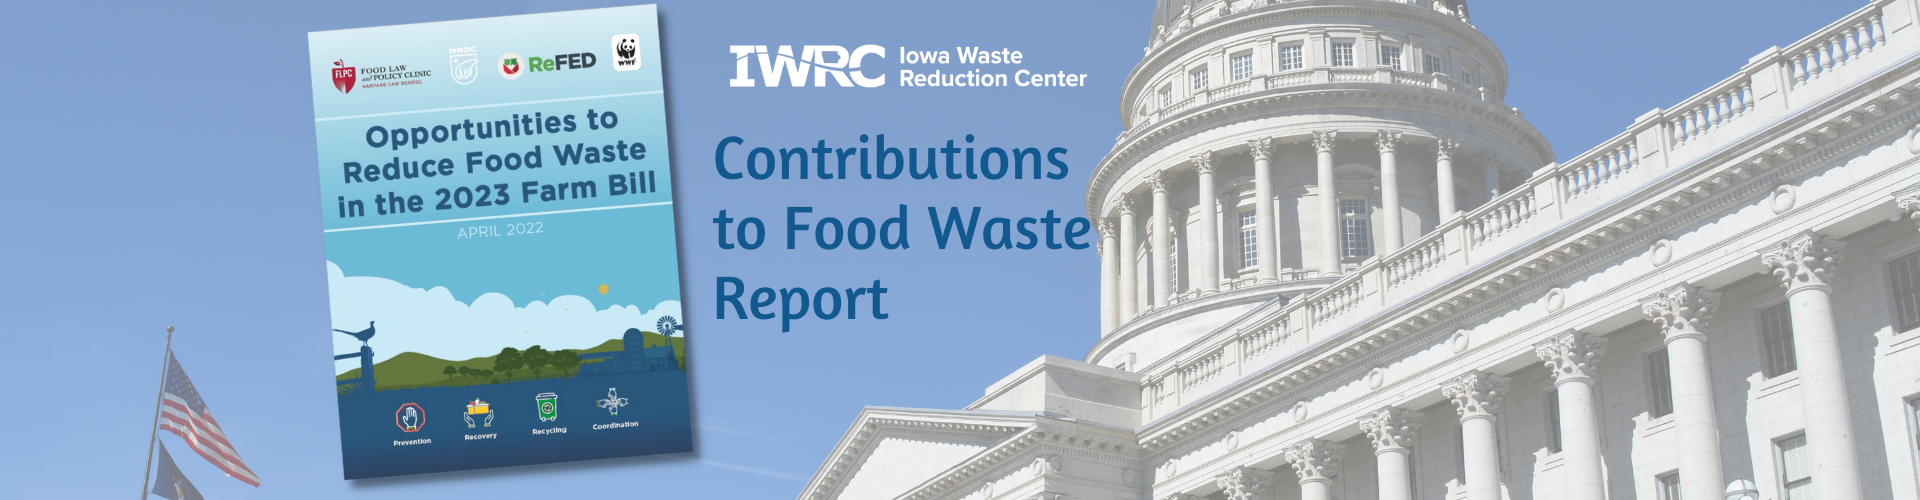 Contribution to Food Waste Report